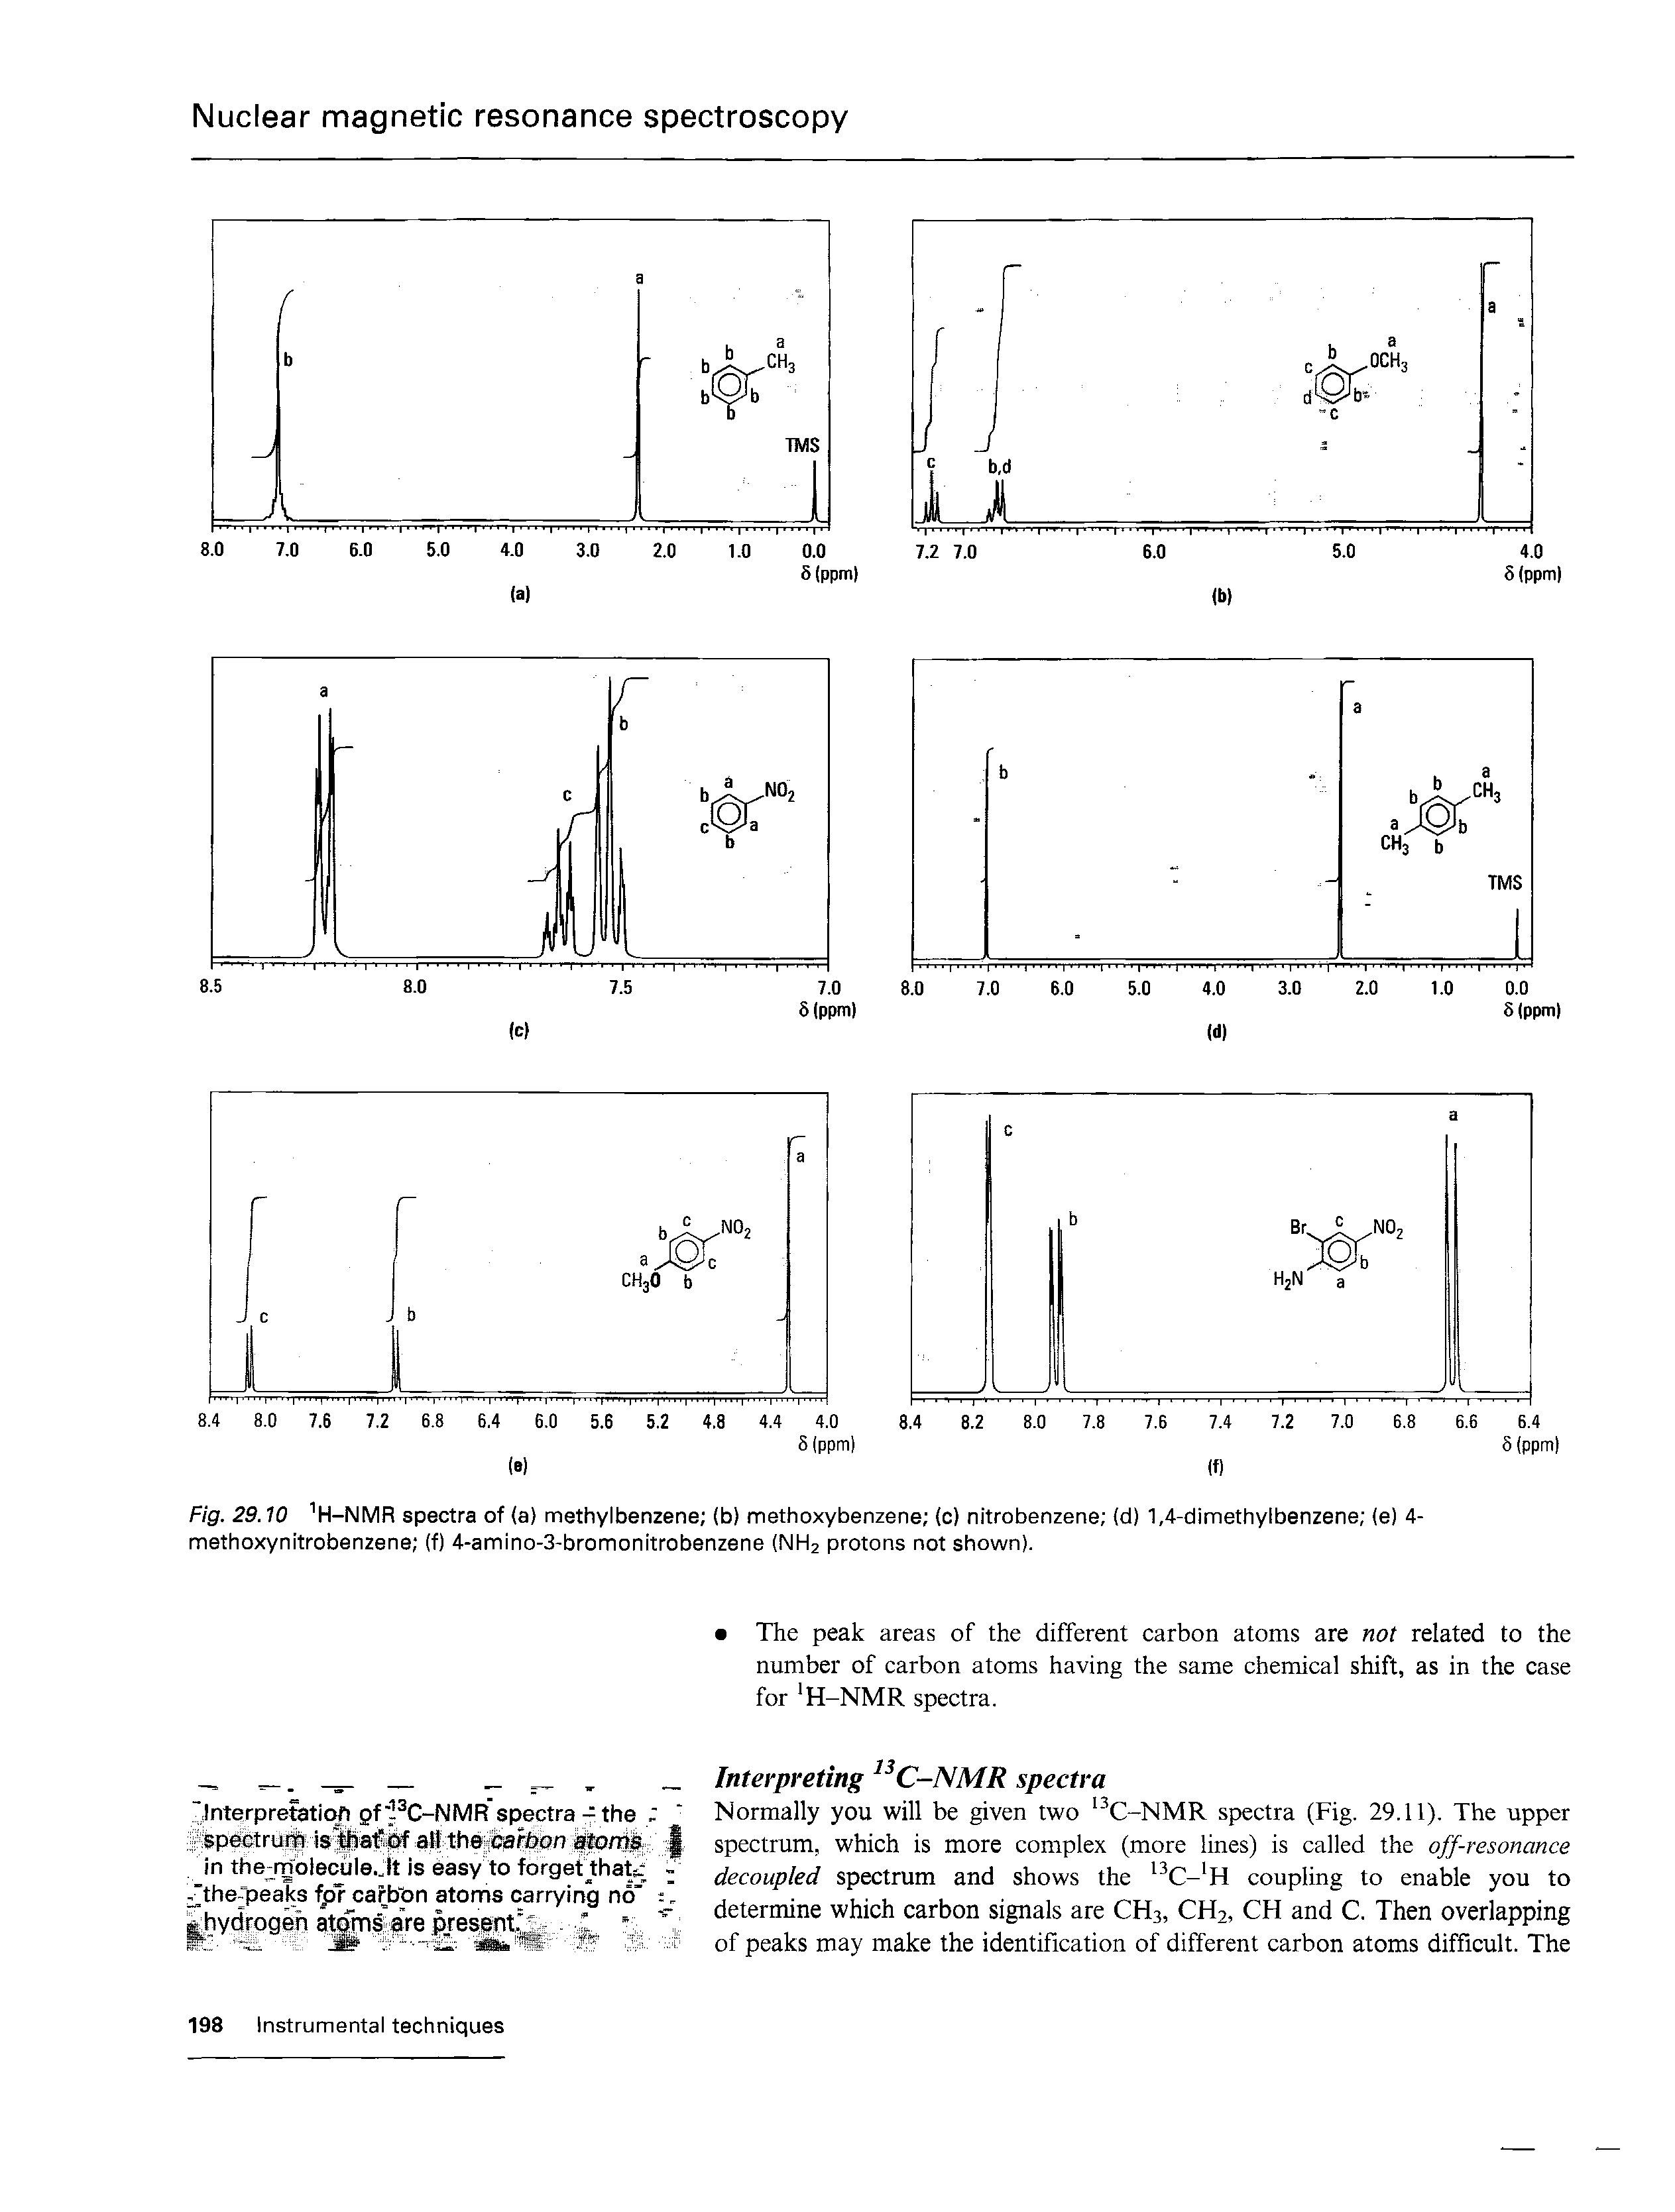 Fig. 29.10 H-NMR spectra of (a) methylbenzene (b) methoxybenzene (c) nitrobenzene (d) 1,4-dimethylbenzene (e) 4-methoxynitrobenzene (f) 4-amino-3-bromonitrobenzene (NH2 protons not shown).